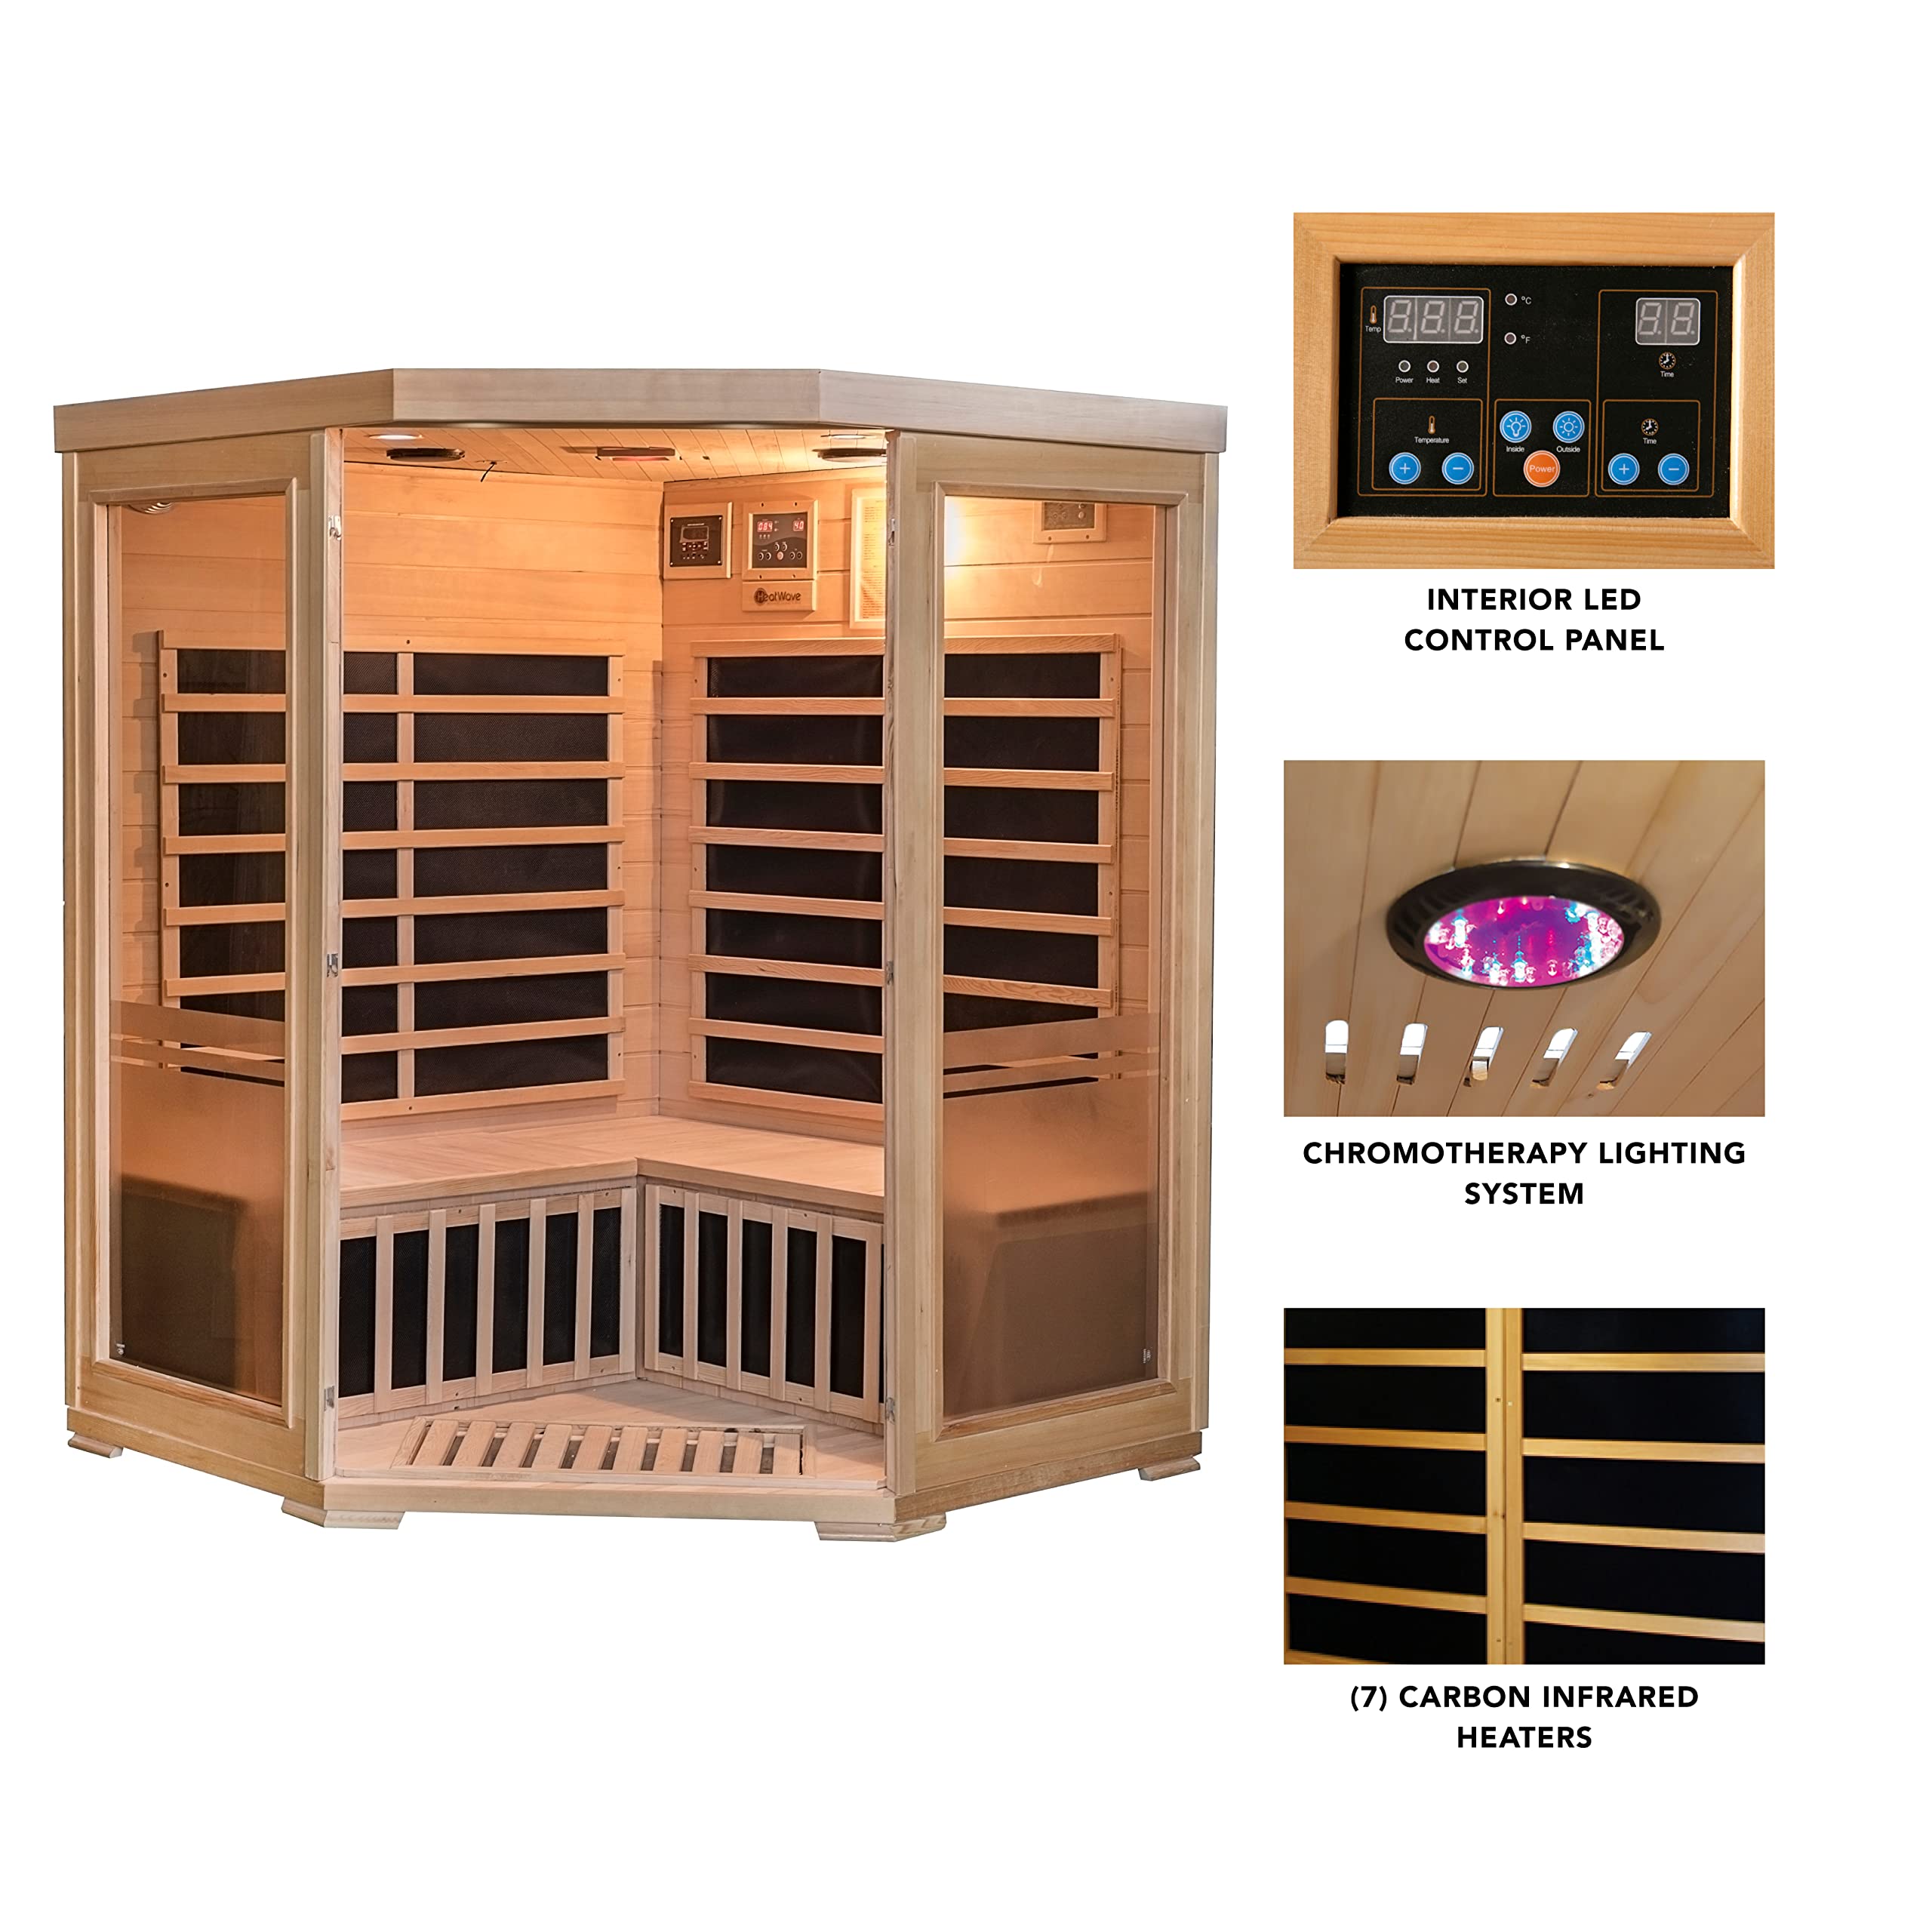 Heat Wave 3 Person Sauna Corner Fitting Infrared FIR FAR 7 Carbon Heaters Hemlock Wood MP3 Player 2 Speakers Color Therapy Light LED Control Panel